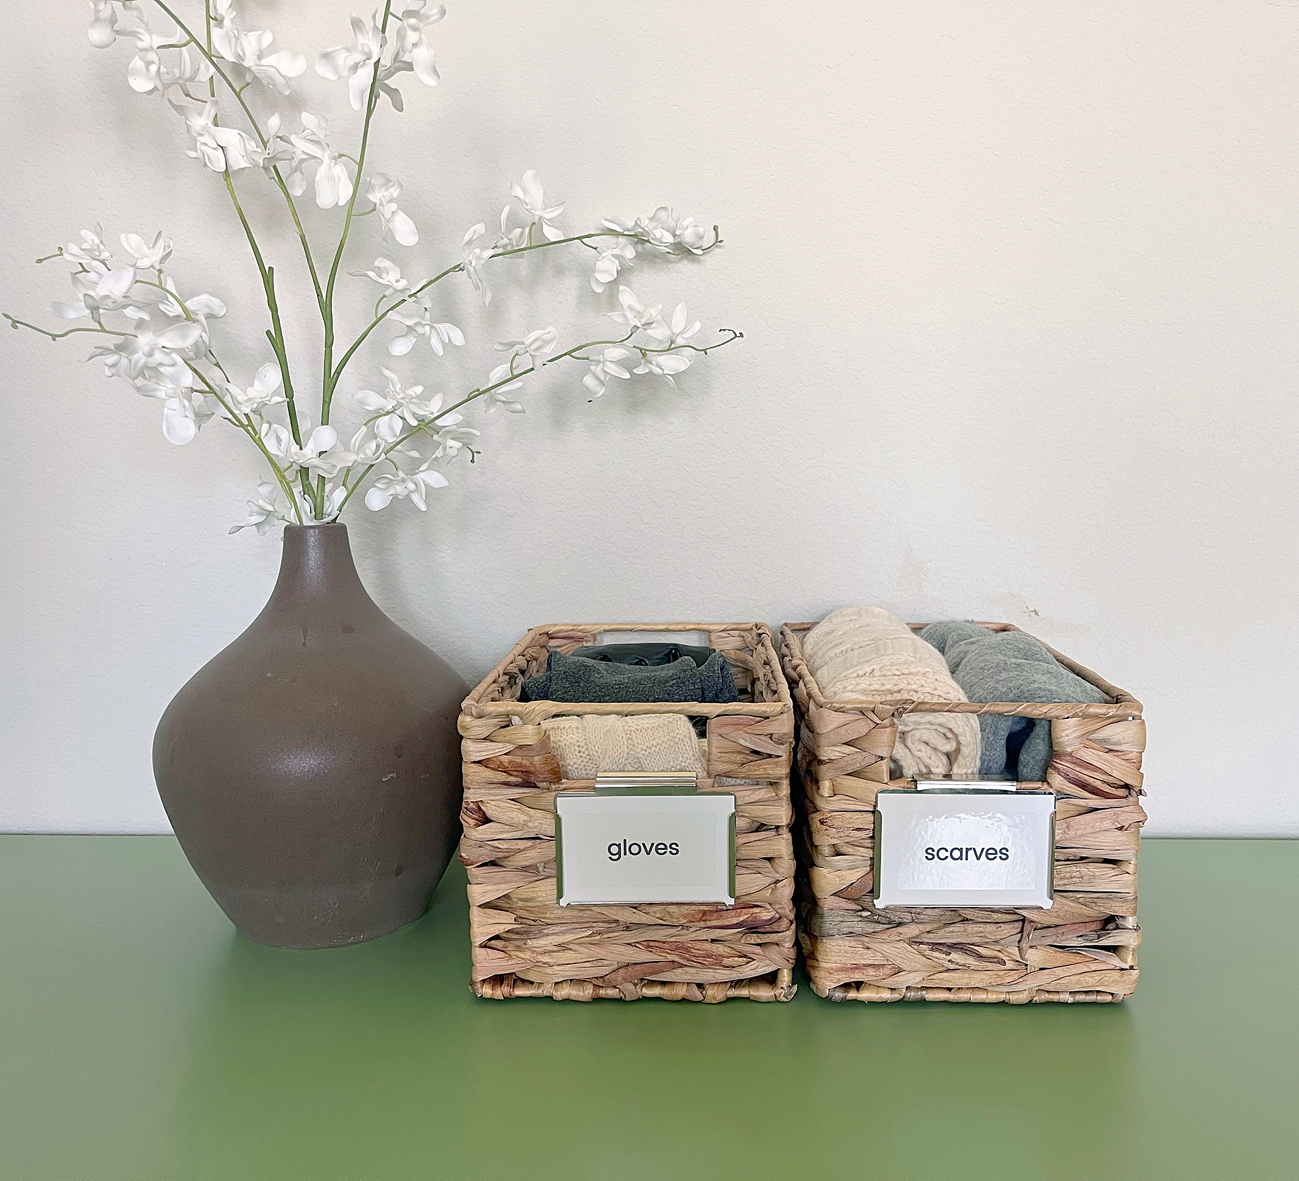 Two Water Hyacinth Baskets with Products Label It! Label Holders